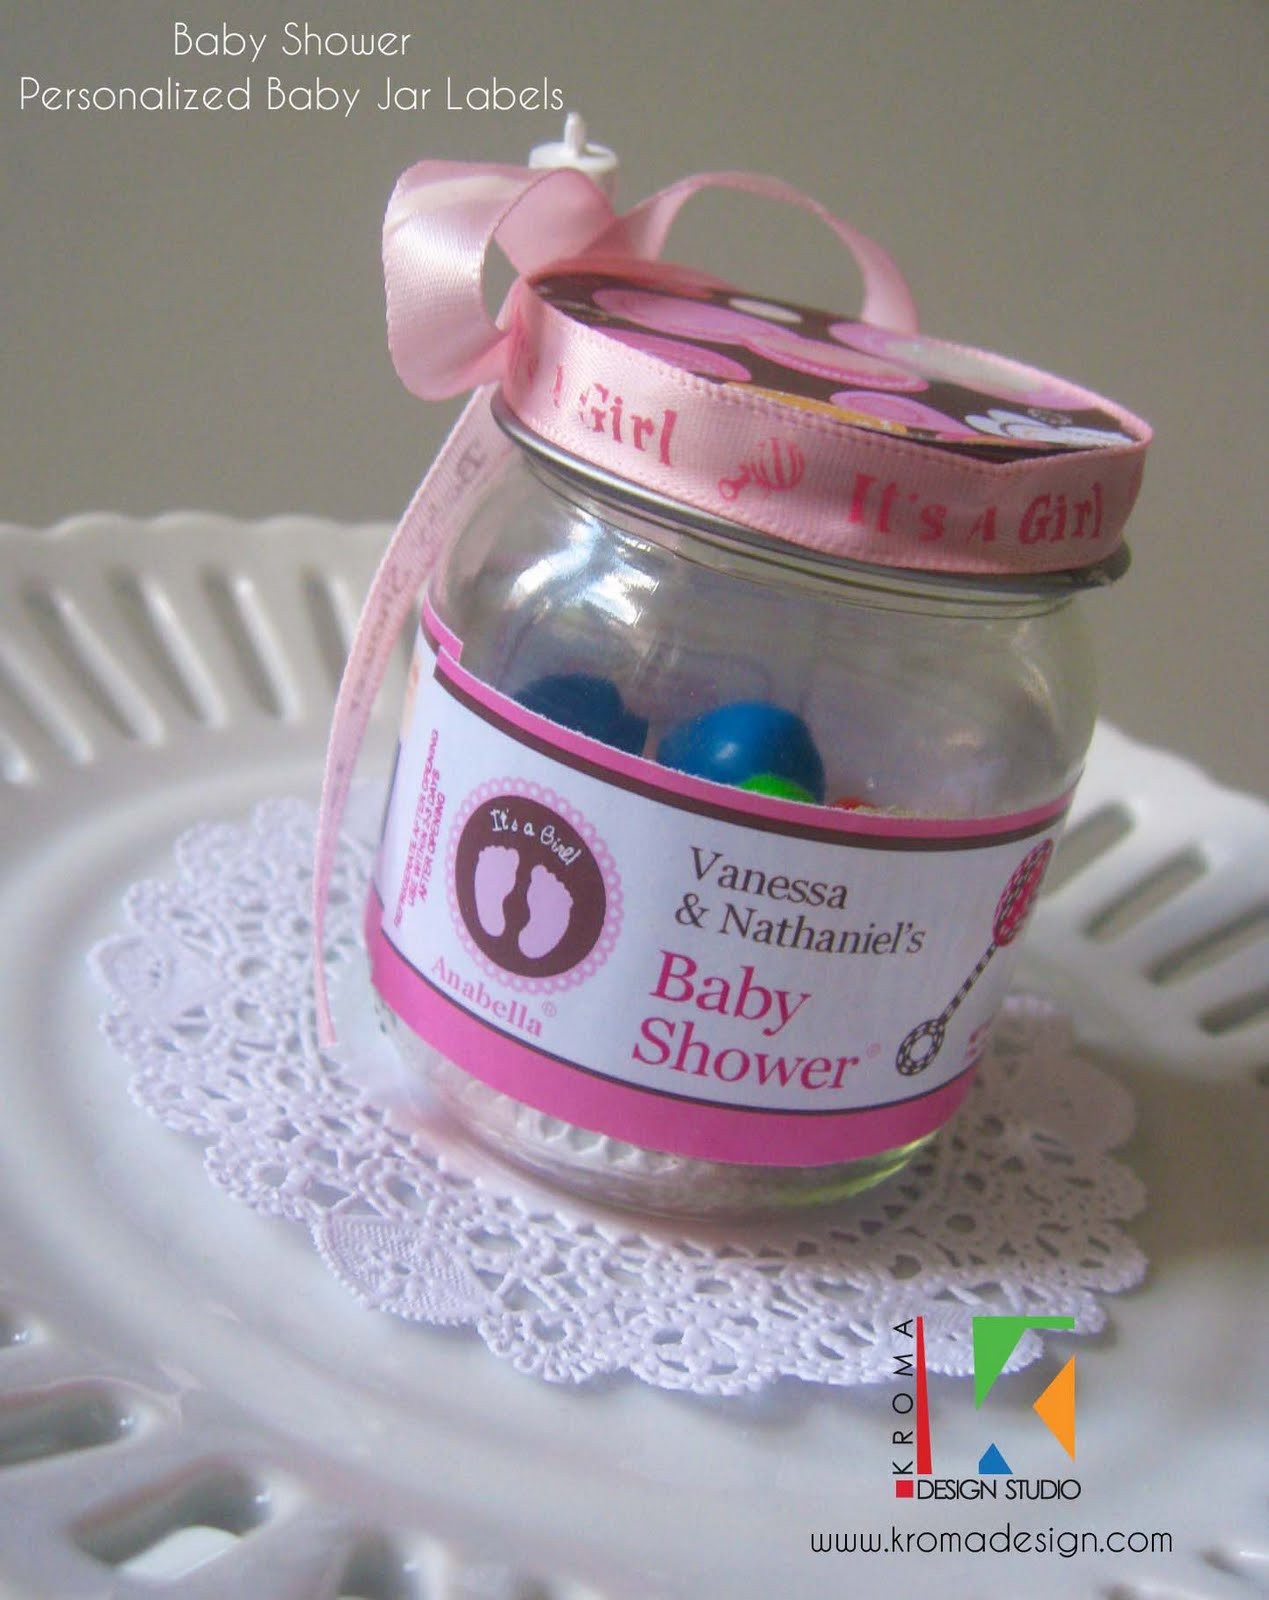 DIY Baby Shower Favors Ideas
 Baby Showers DIY Printable Baby Jar Label Favors for